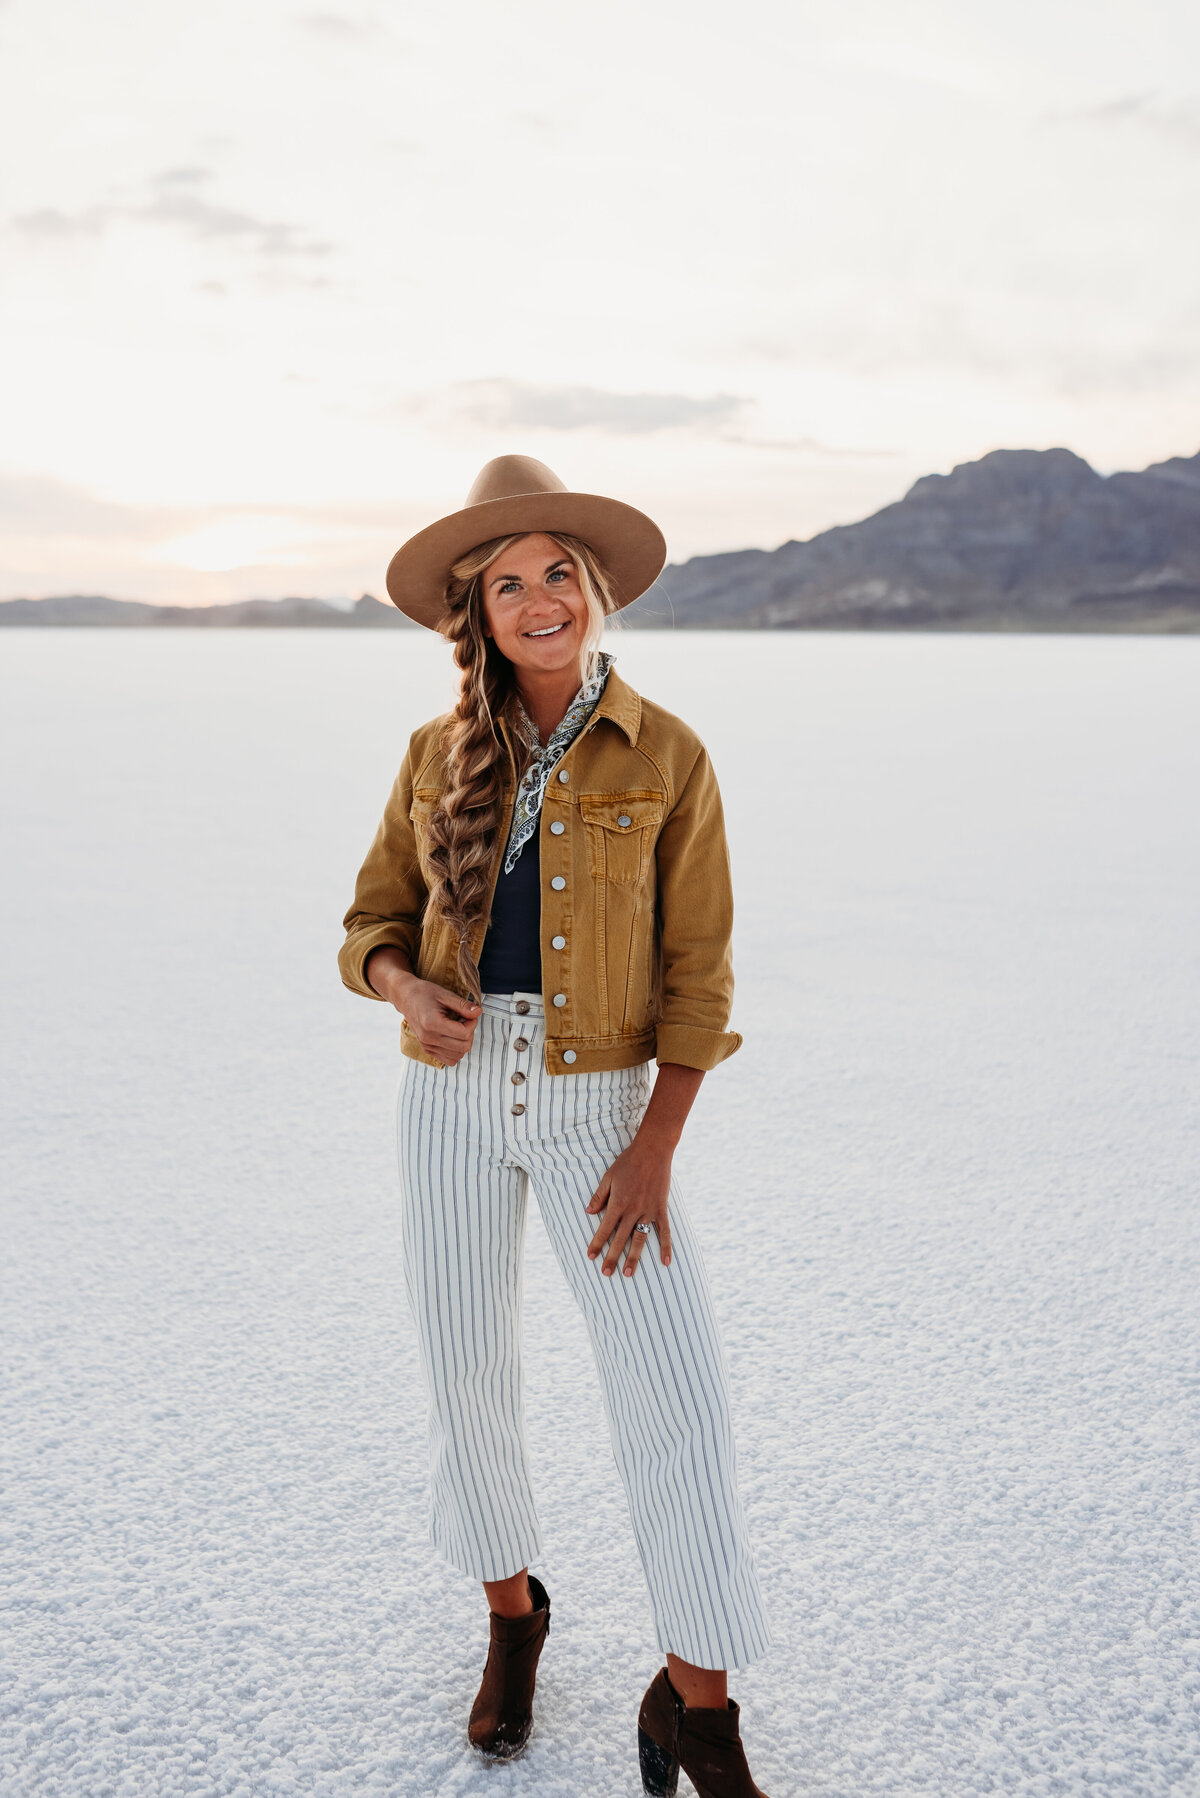 gorgeous hairstylist photographed at the salt flats